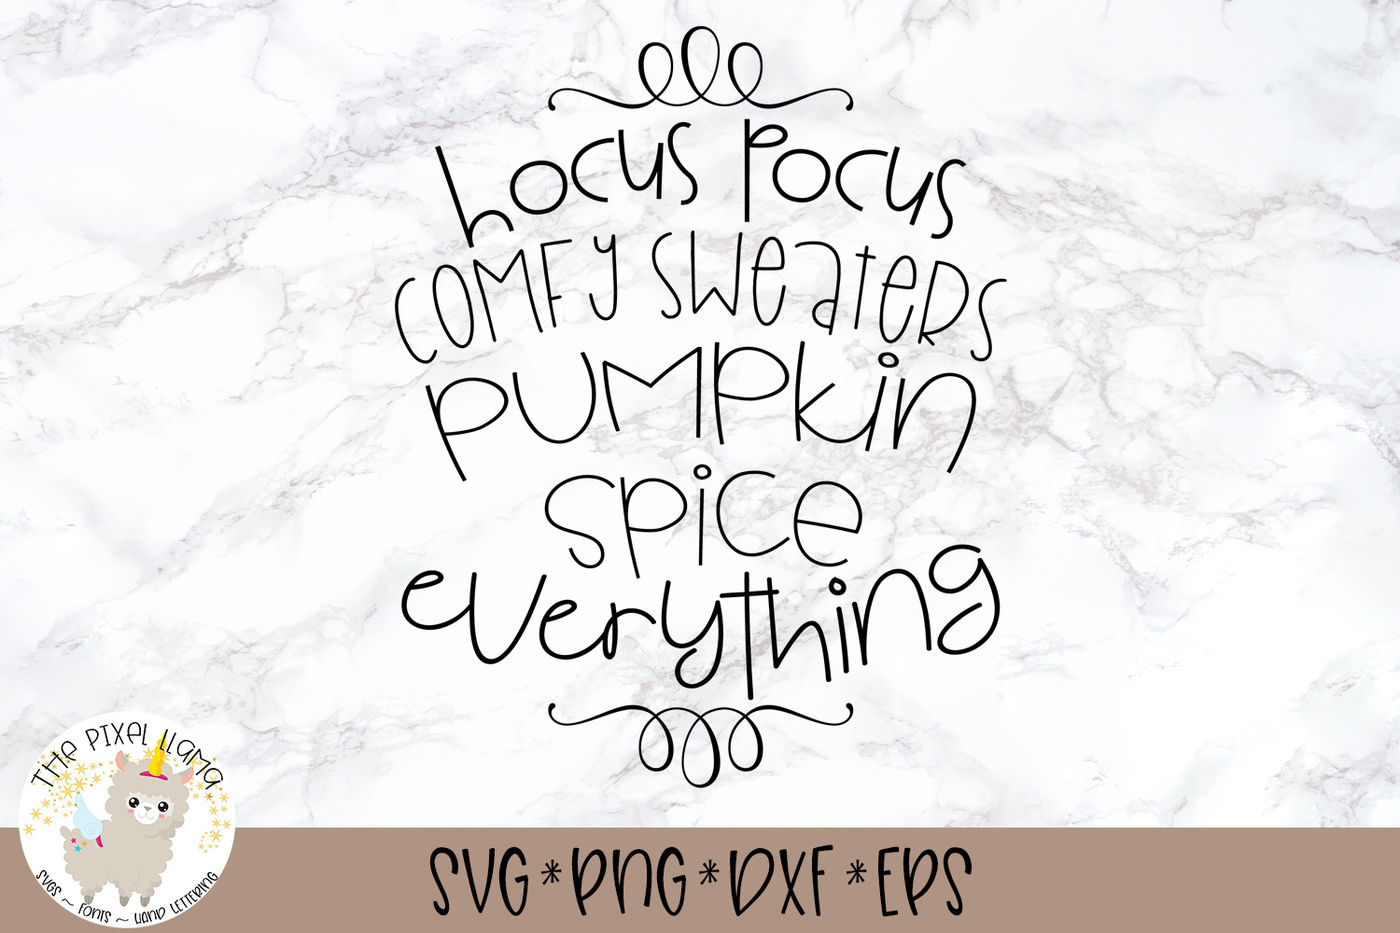 Hocus Pocus Comfy Sweaters Pumpkin Spice Everything Svg Cut File By The Pixel Llama Thehungryjpeg Com